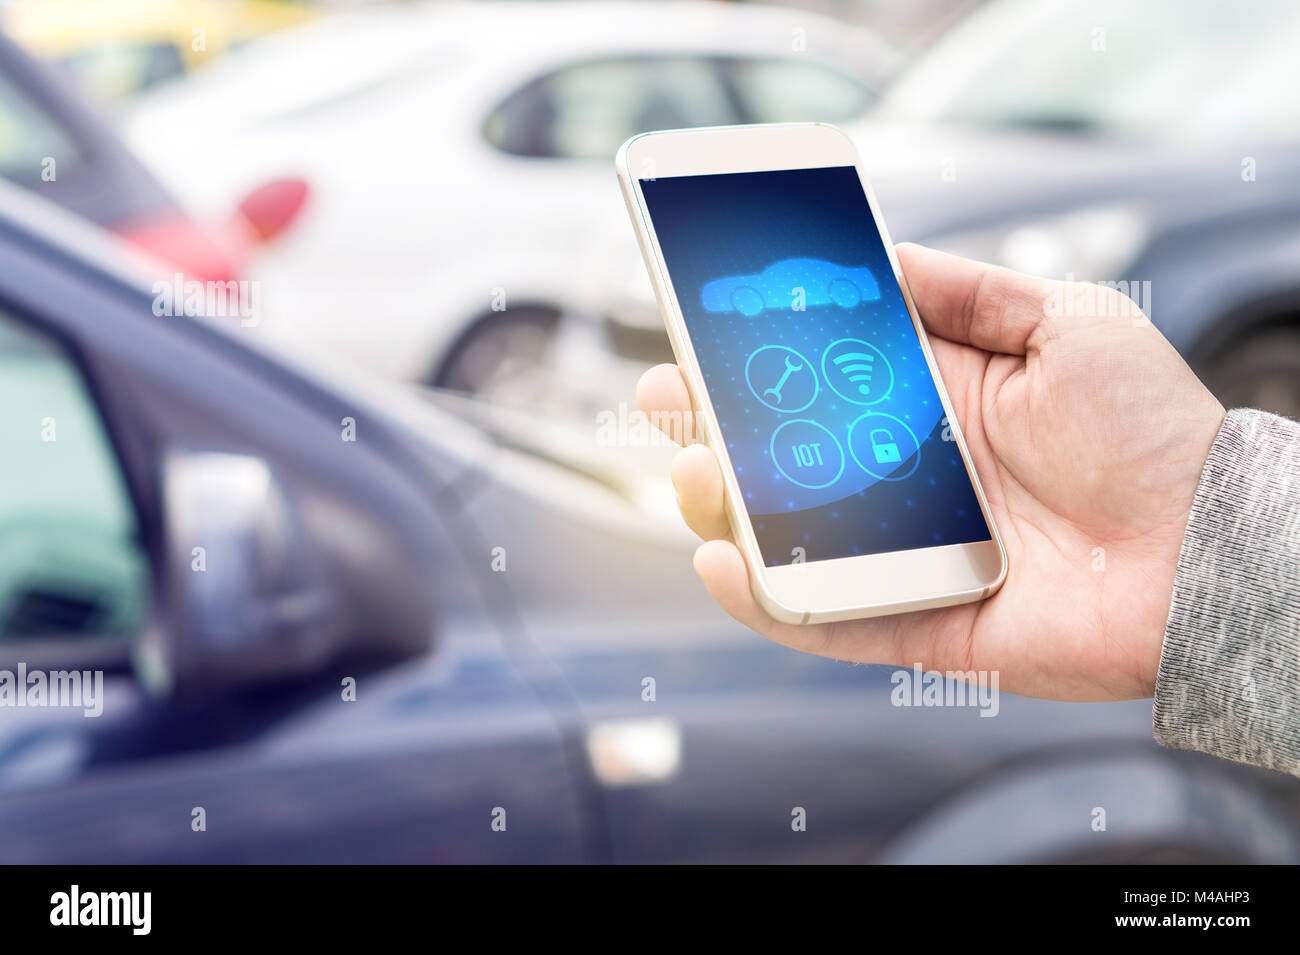 Internet of things (IOT) mobile app in smart phone for modern car. Hand holding smartphone controlling ADAS system. Vehicles parked in the background. Stock Photo